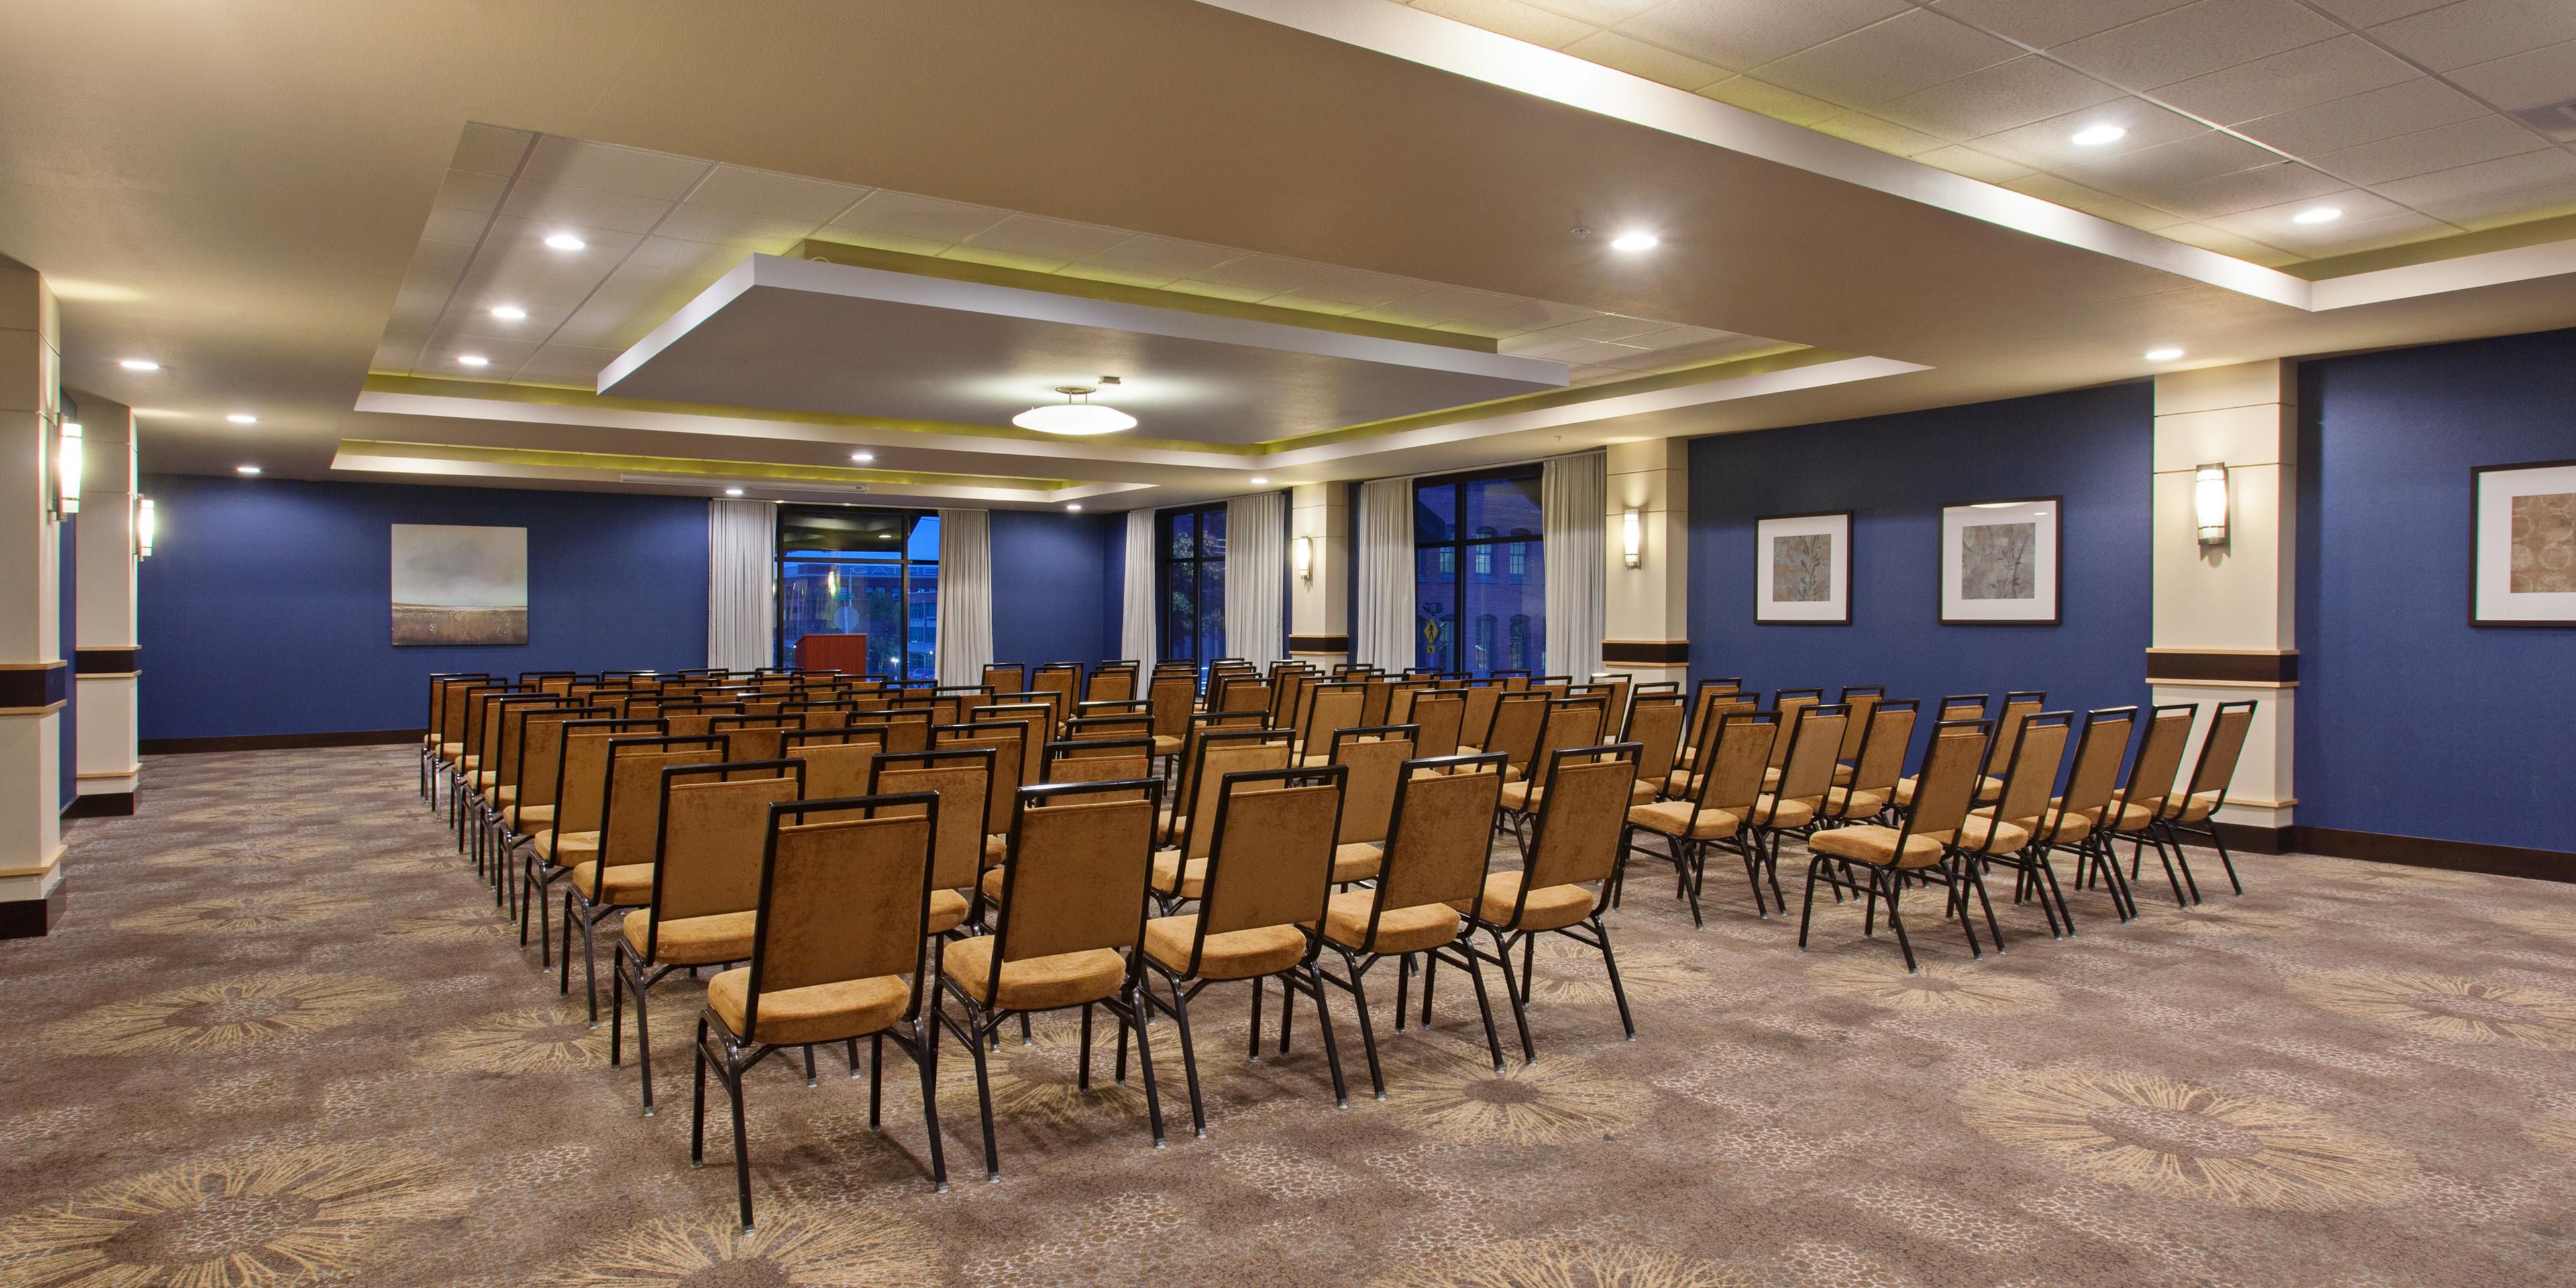 Stay, and Meet in our Tacoma room; With 1400 sq ft of flexible space we are sure our hotel is perfect for your next event. Ask about our special offers.